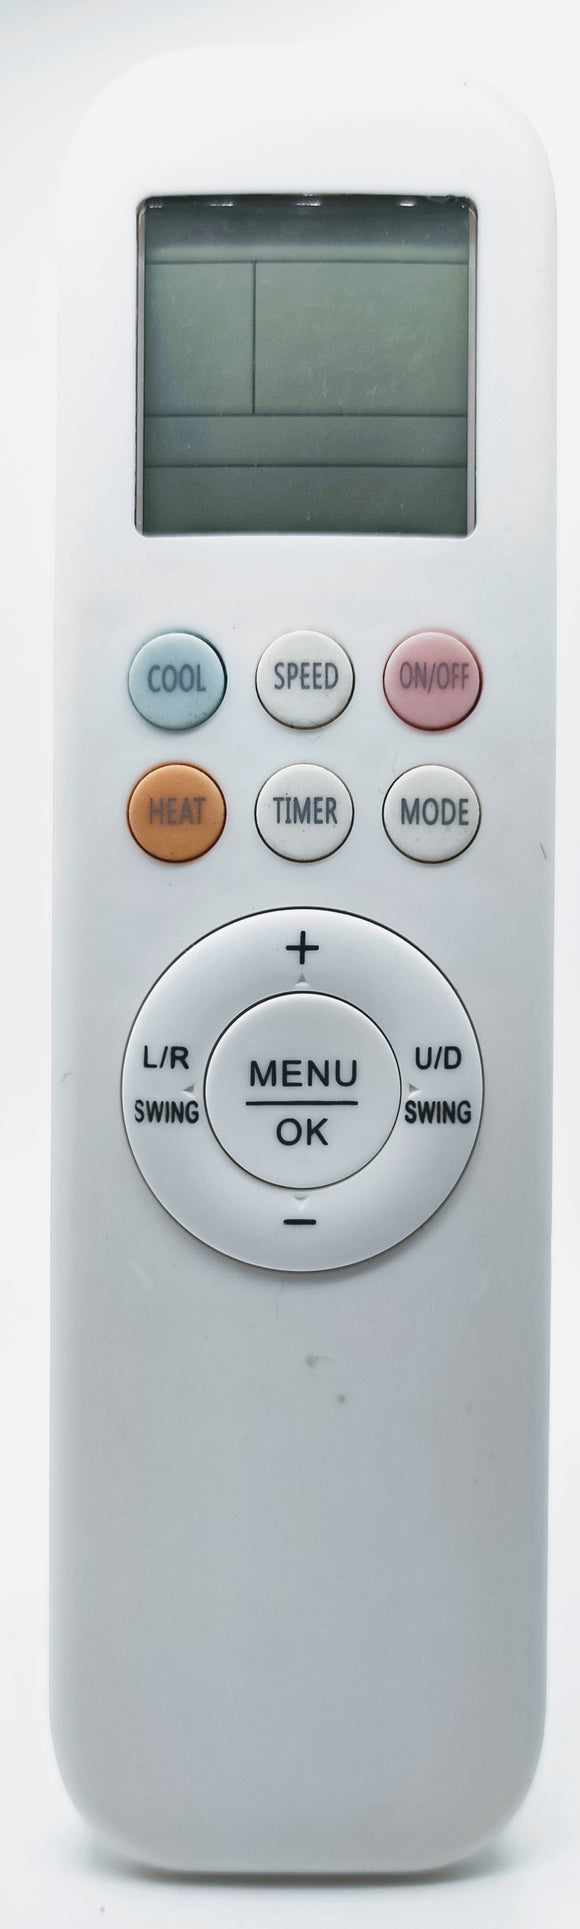 Air Conditioner Remote for Tempblue